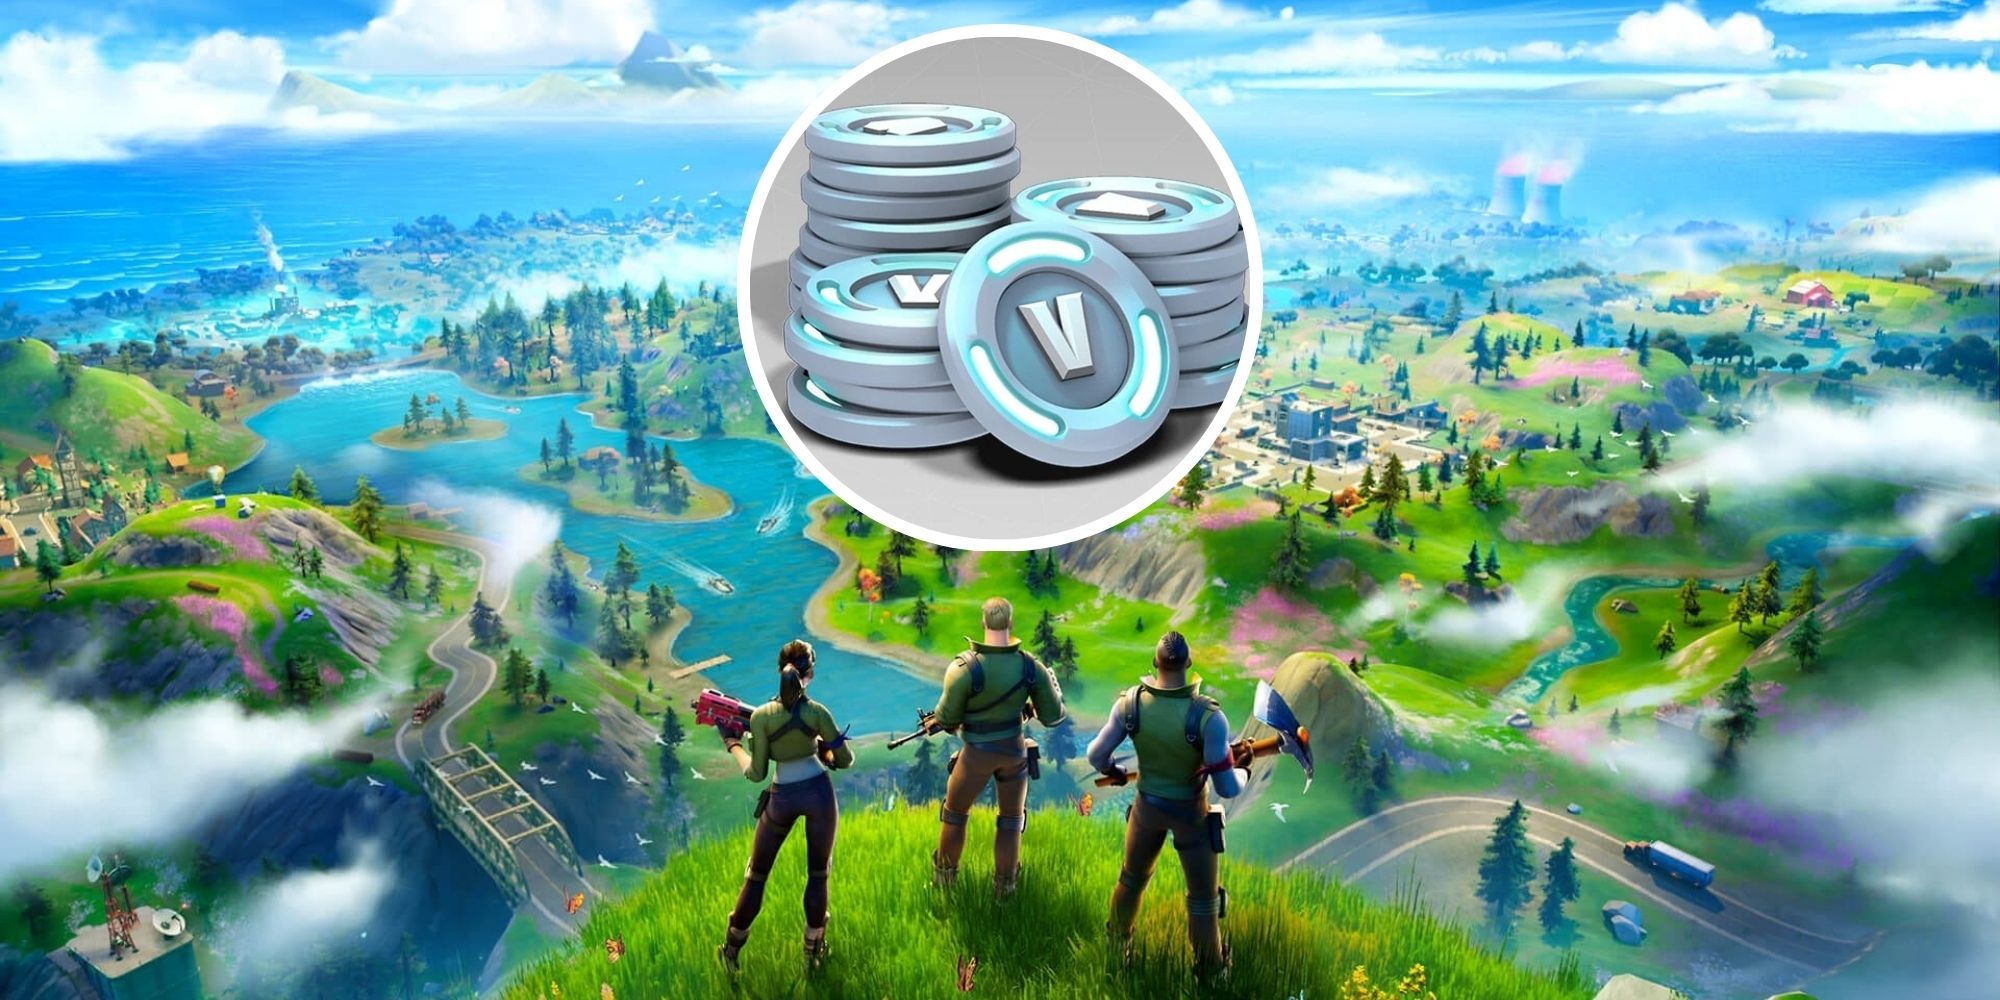 Fortnite Players Exploited A Glitch To Obtain Free Skins, Now They're In V-Bucks Debt